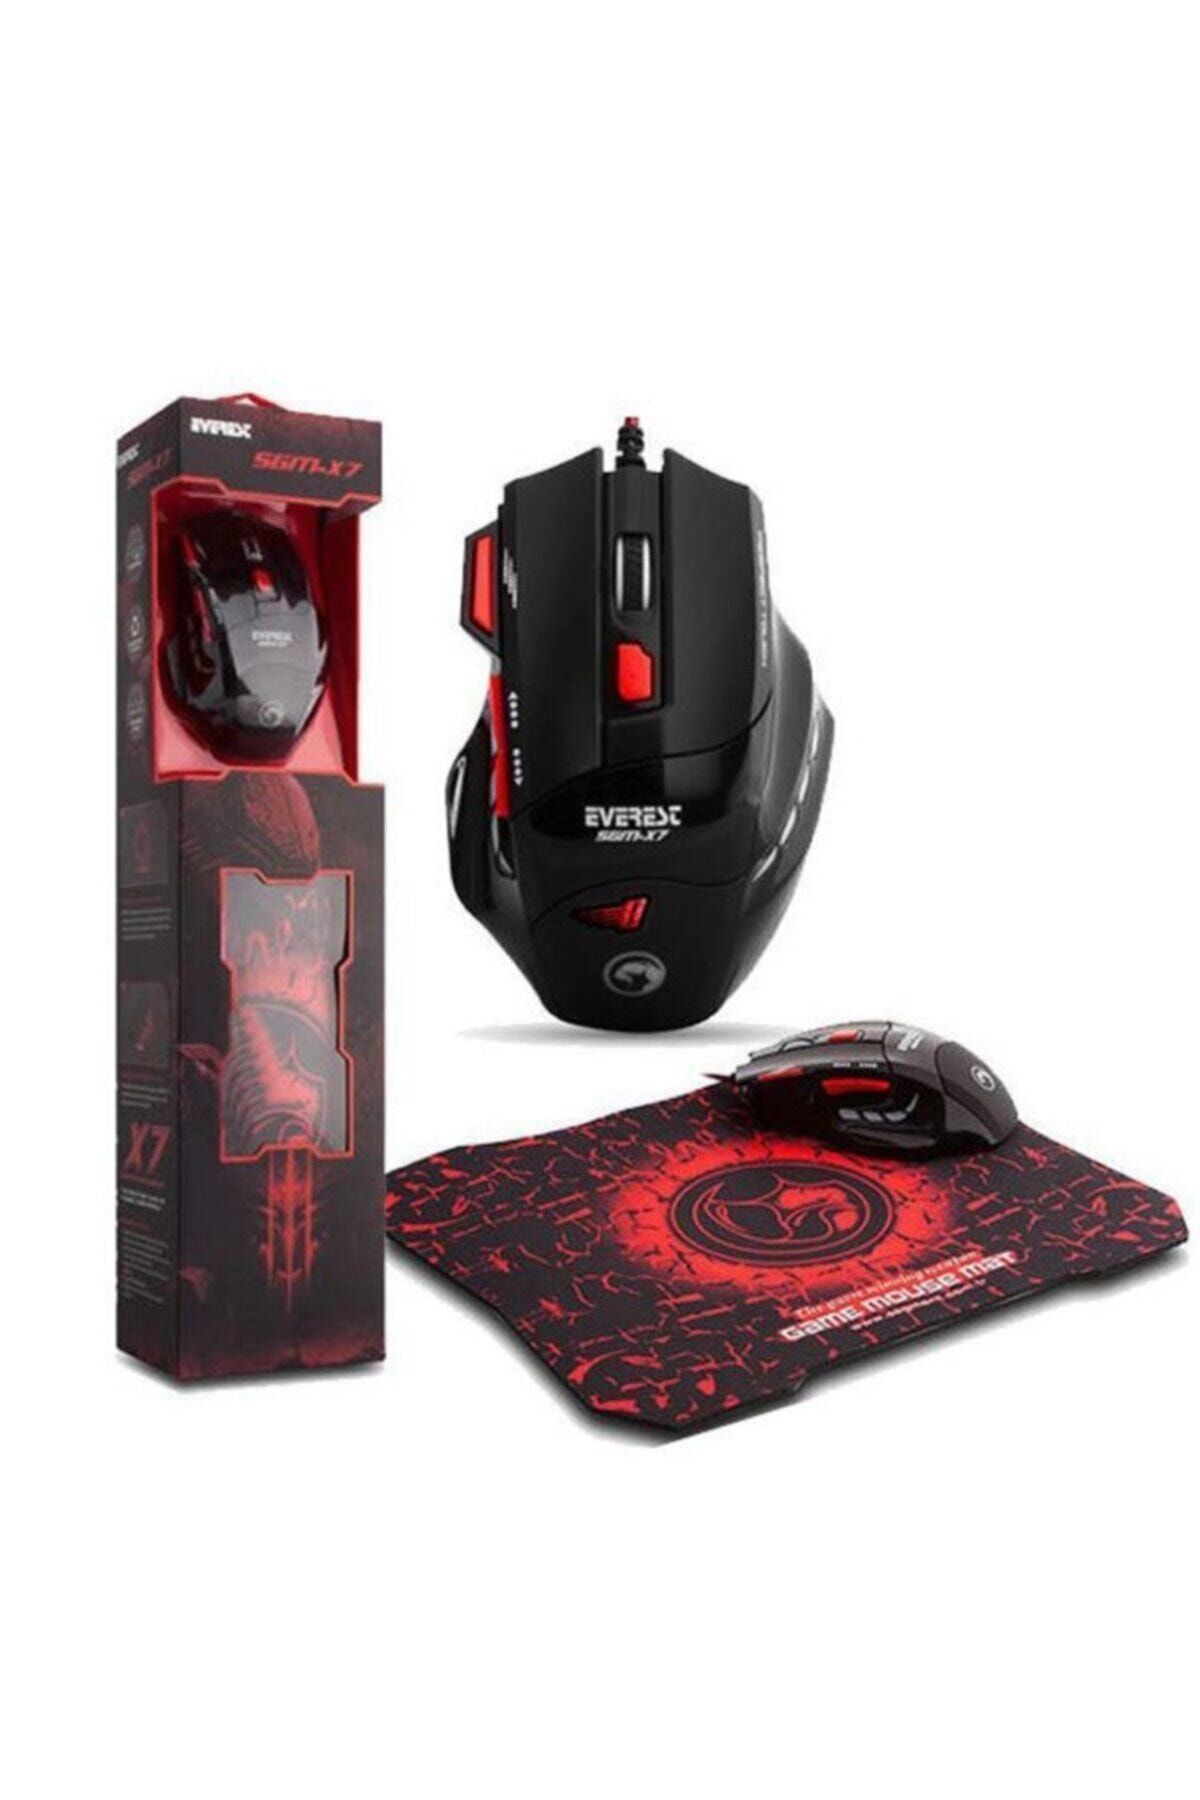 Everest Sgm-x7 Kablolu Gaming Mouse + Mouse Pad